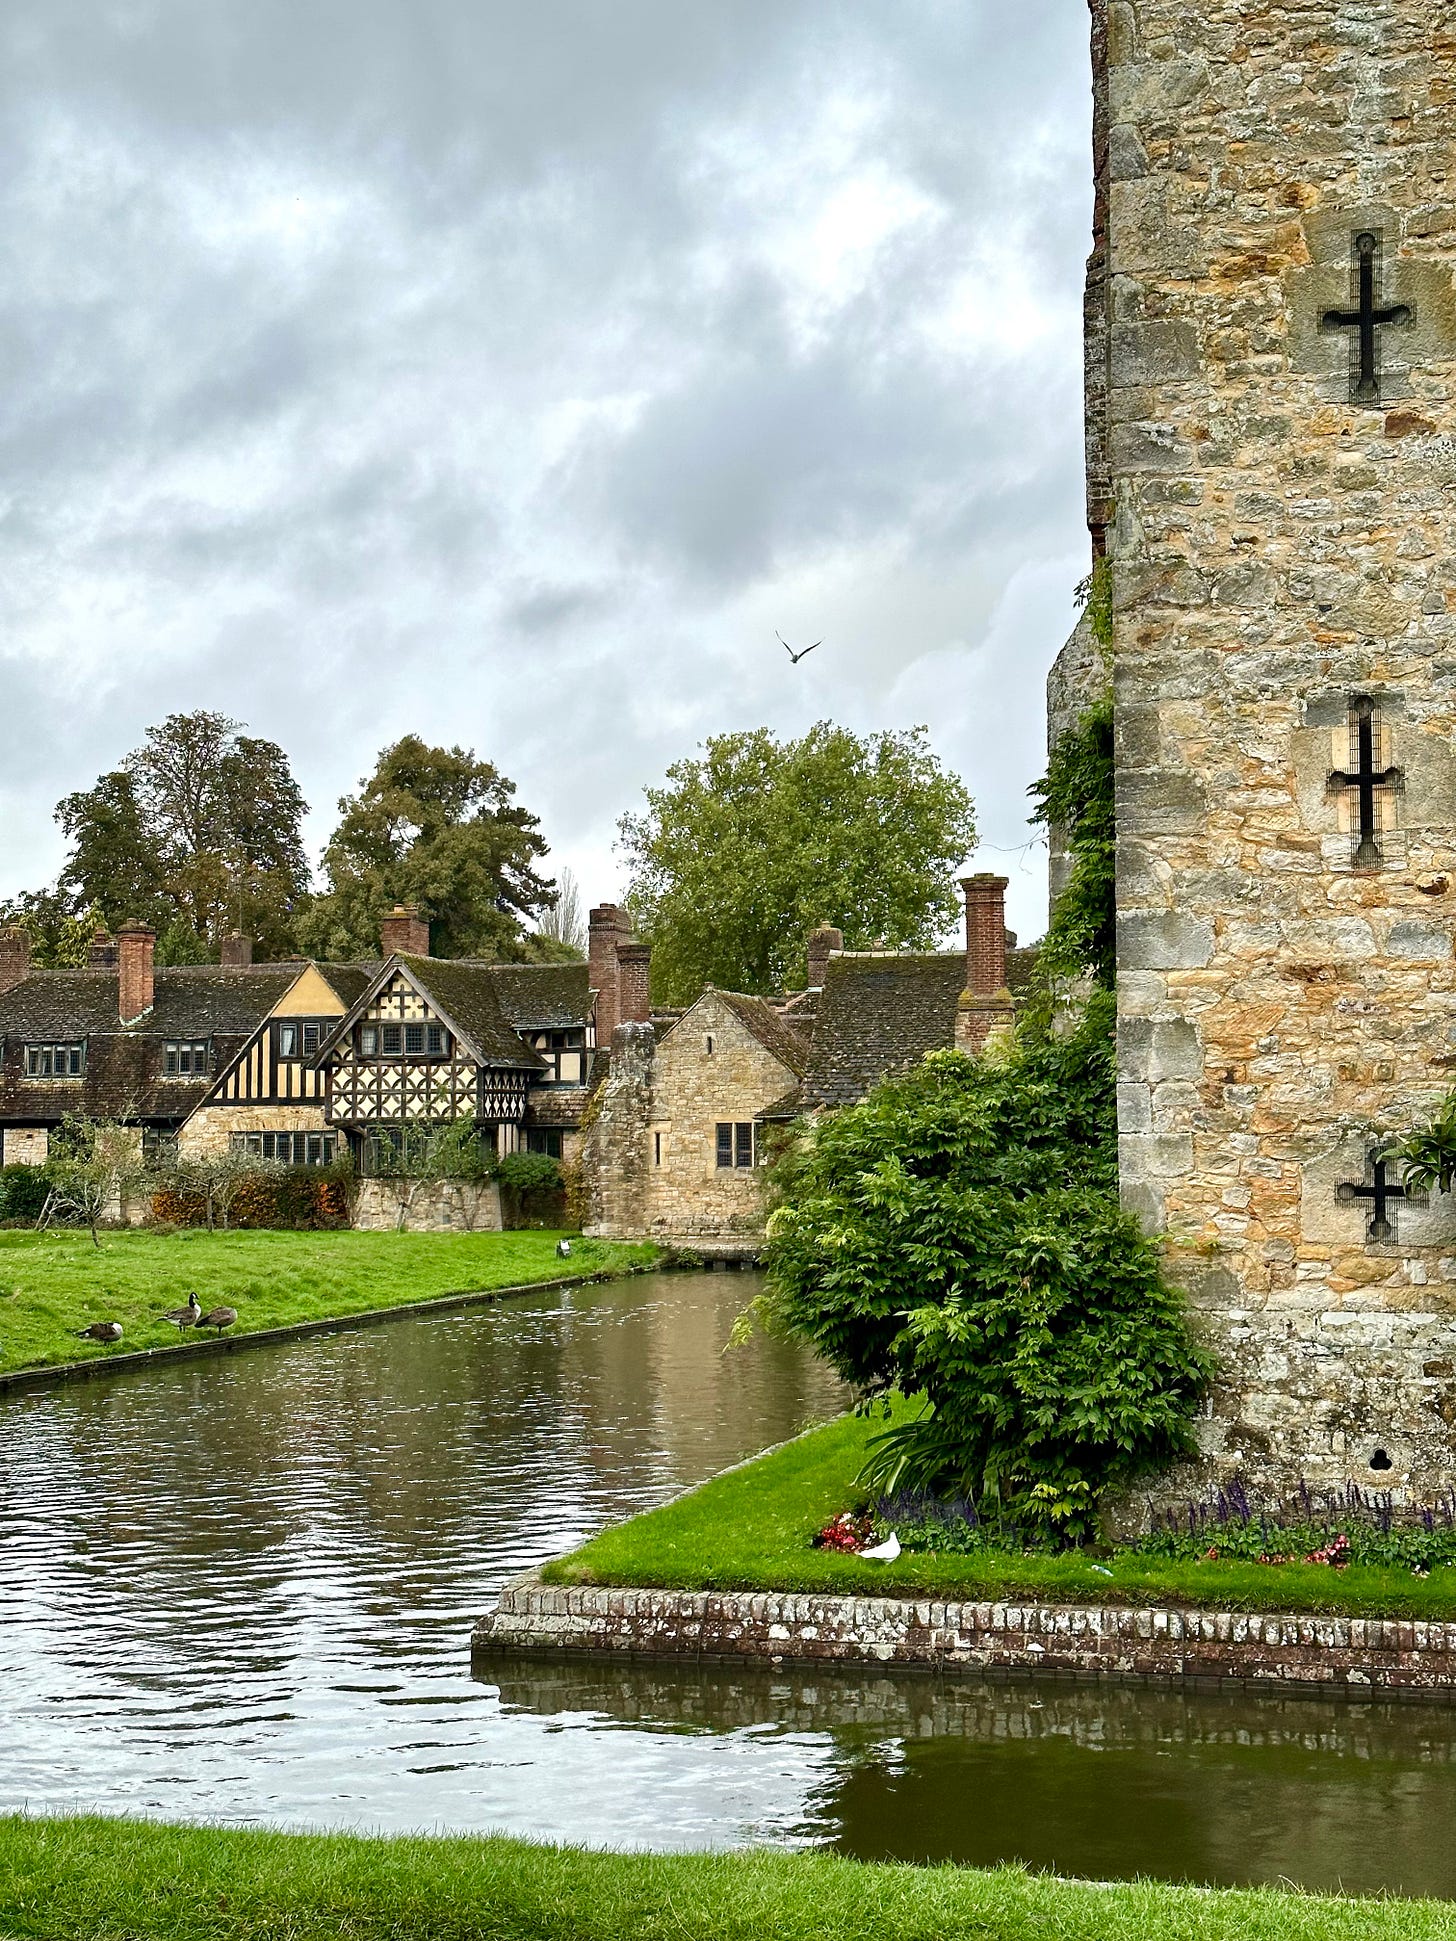 Hever castle and moat, with doves and gardens